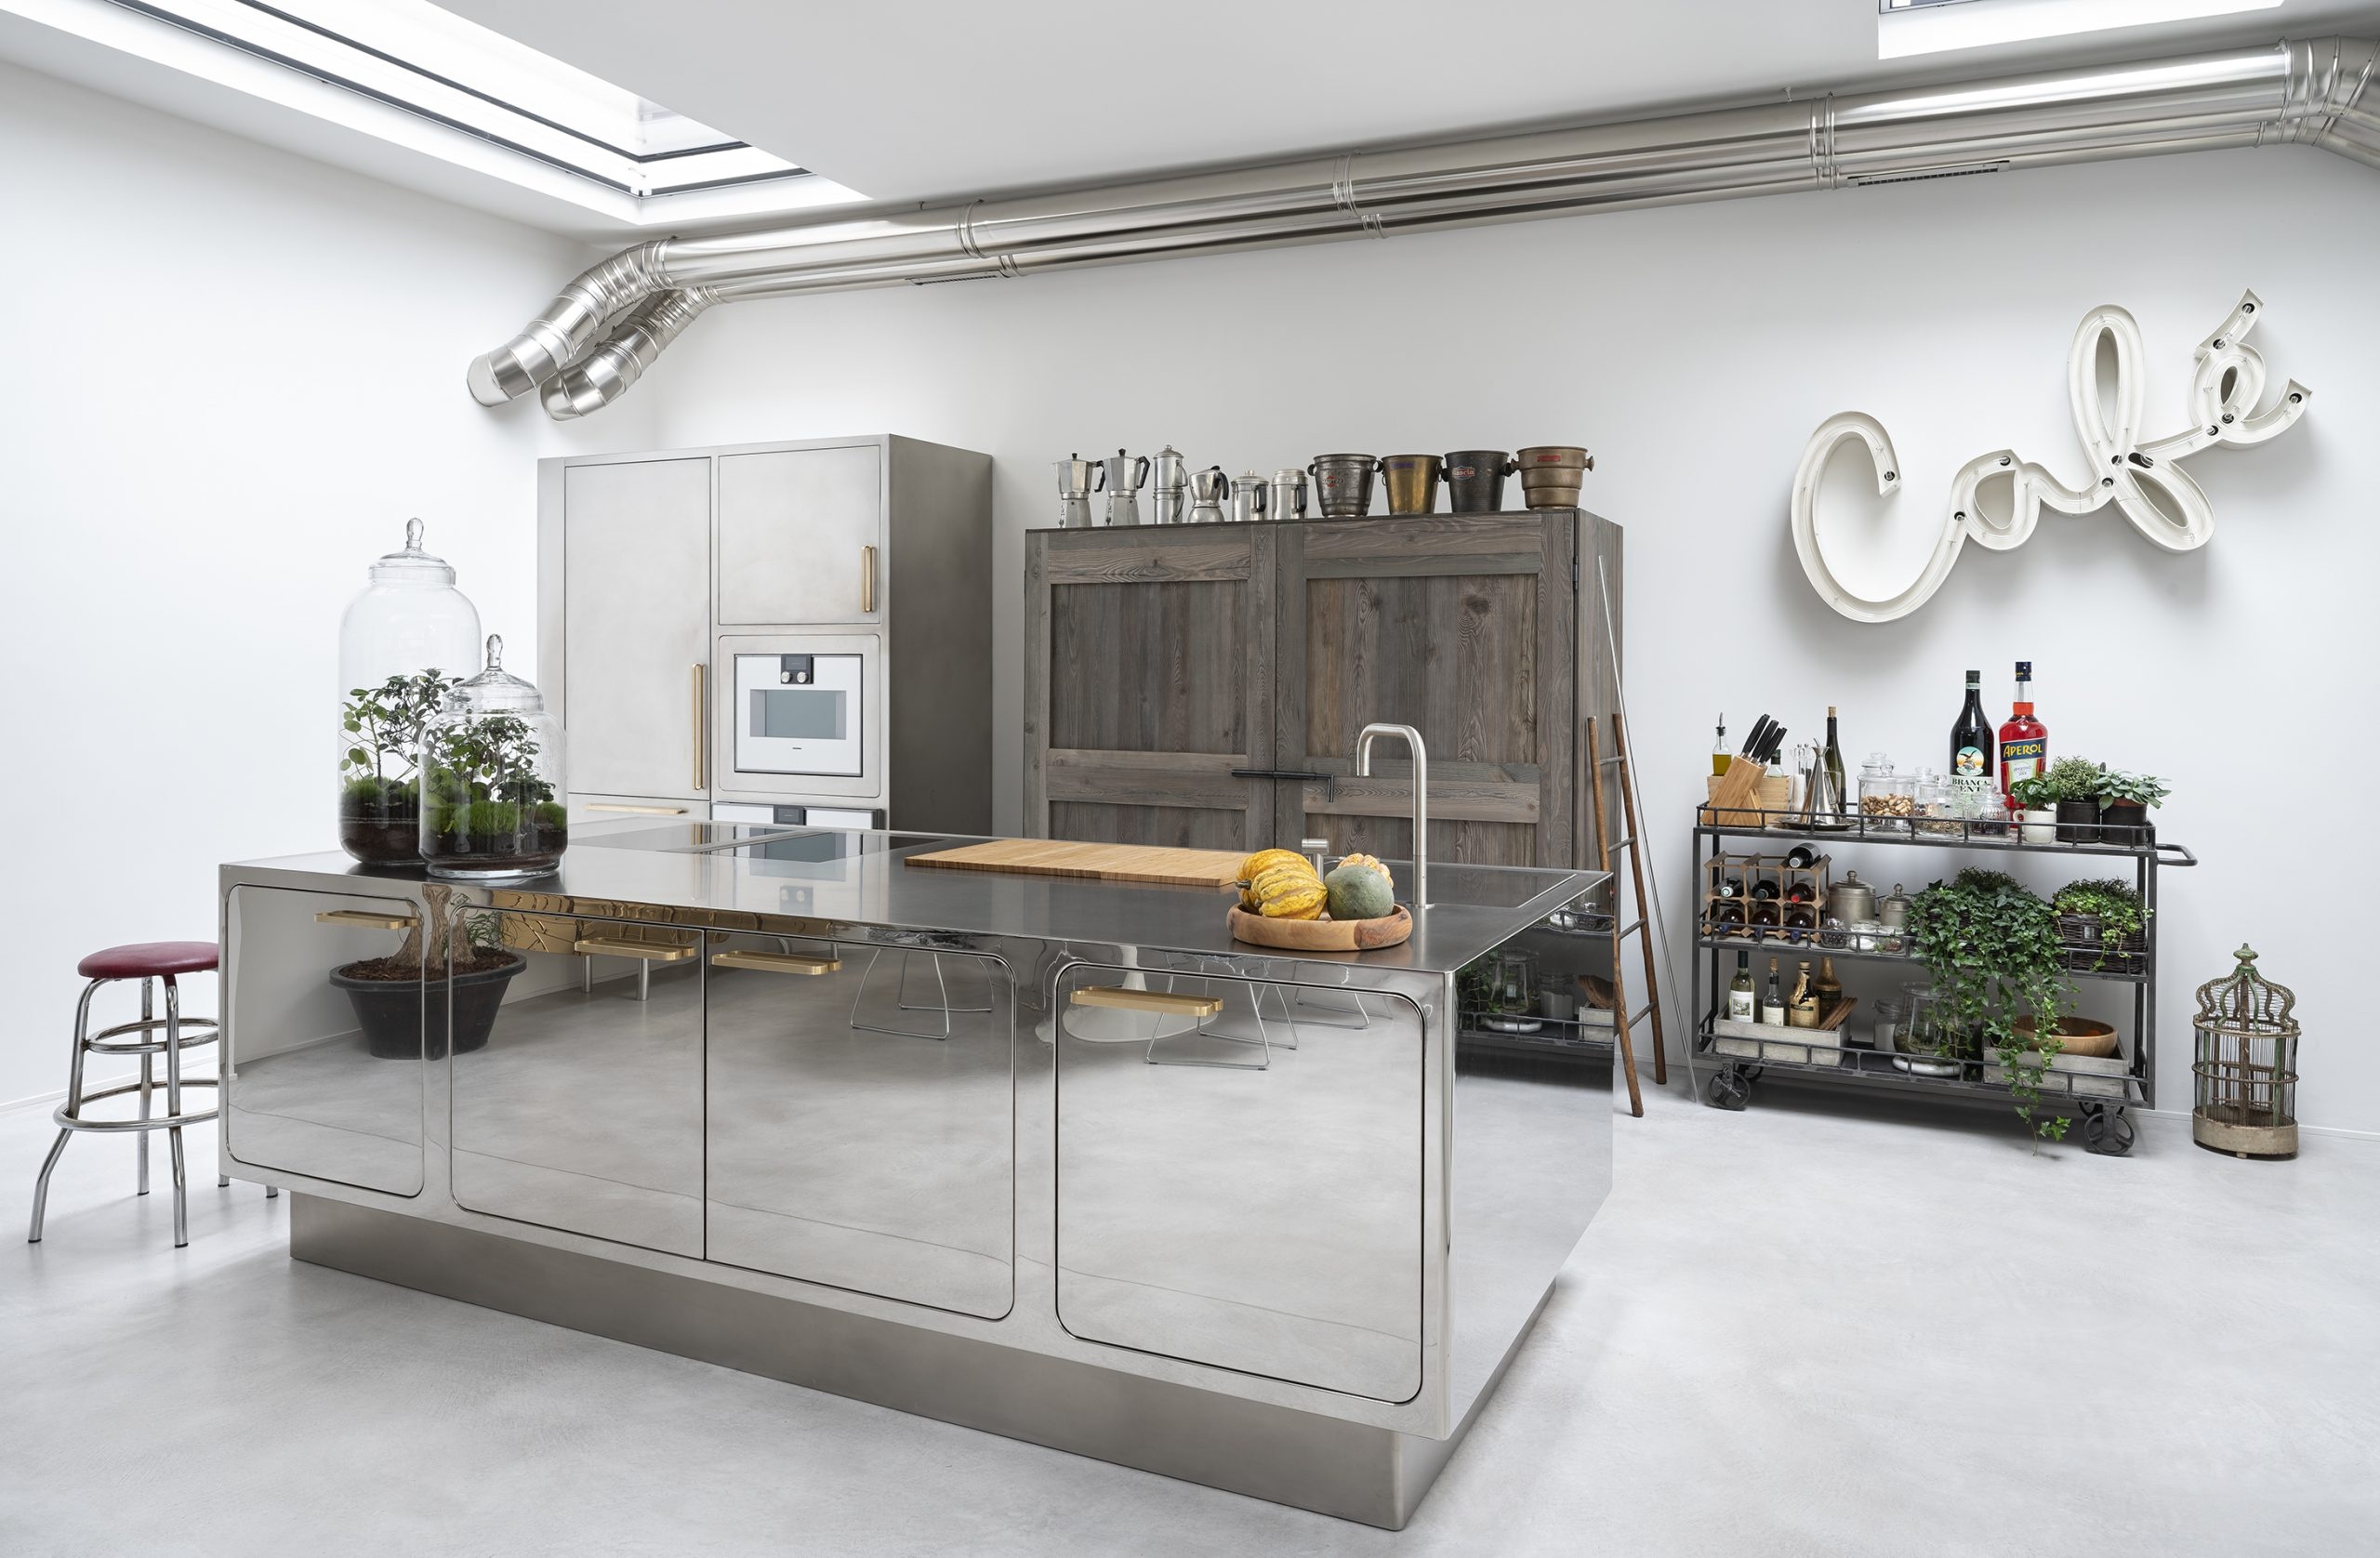 Industrial style kitchens, Stylish kitchen design, Functional and chic, Contemporary interiors, 2560x1680 HD Desktop